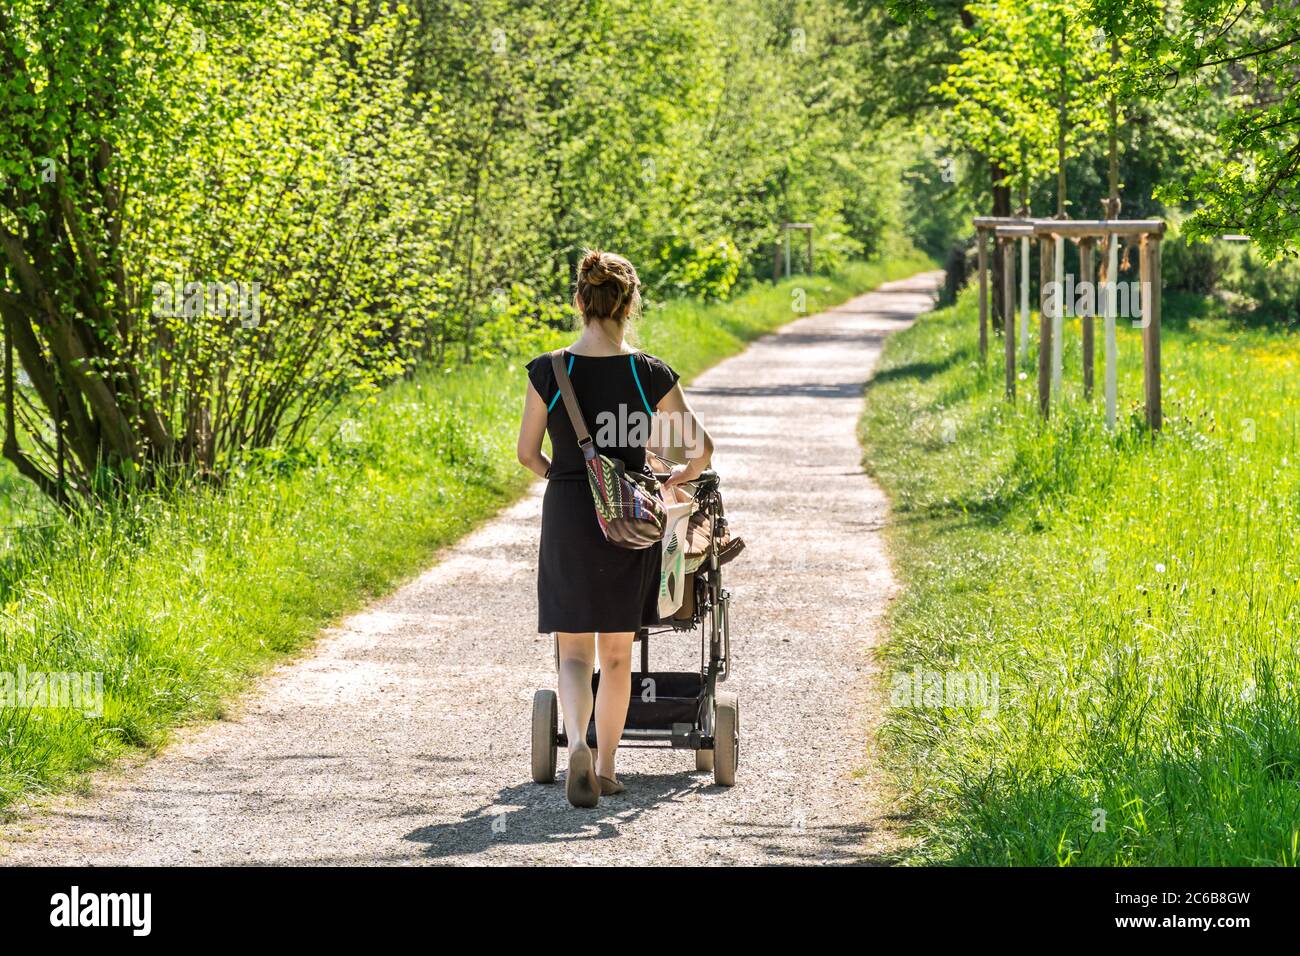 Young woman with buggy in a park in summer Stock Photo